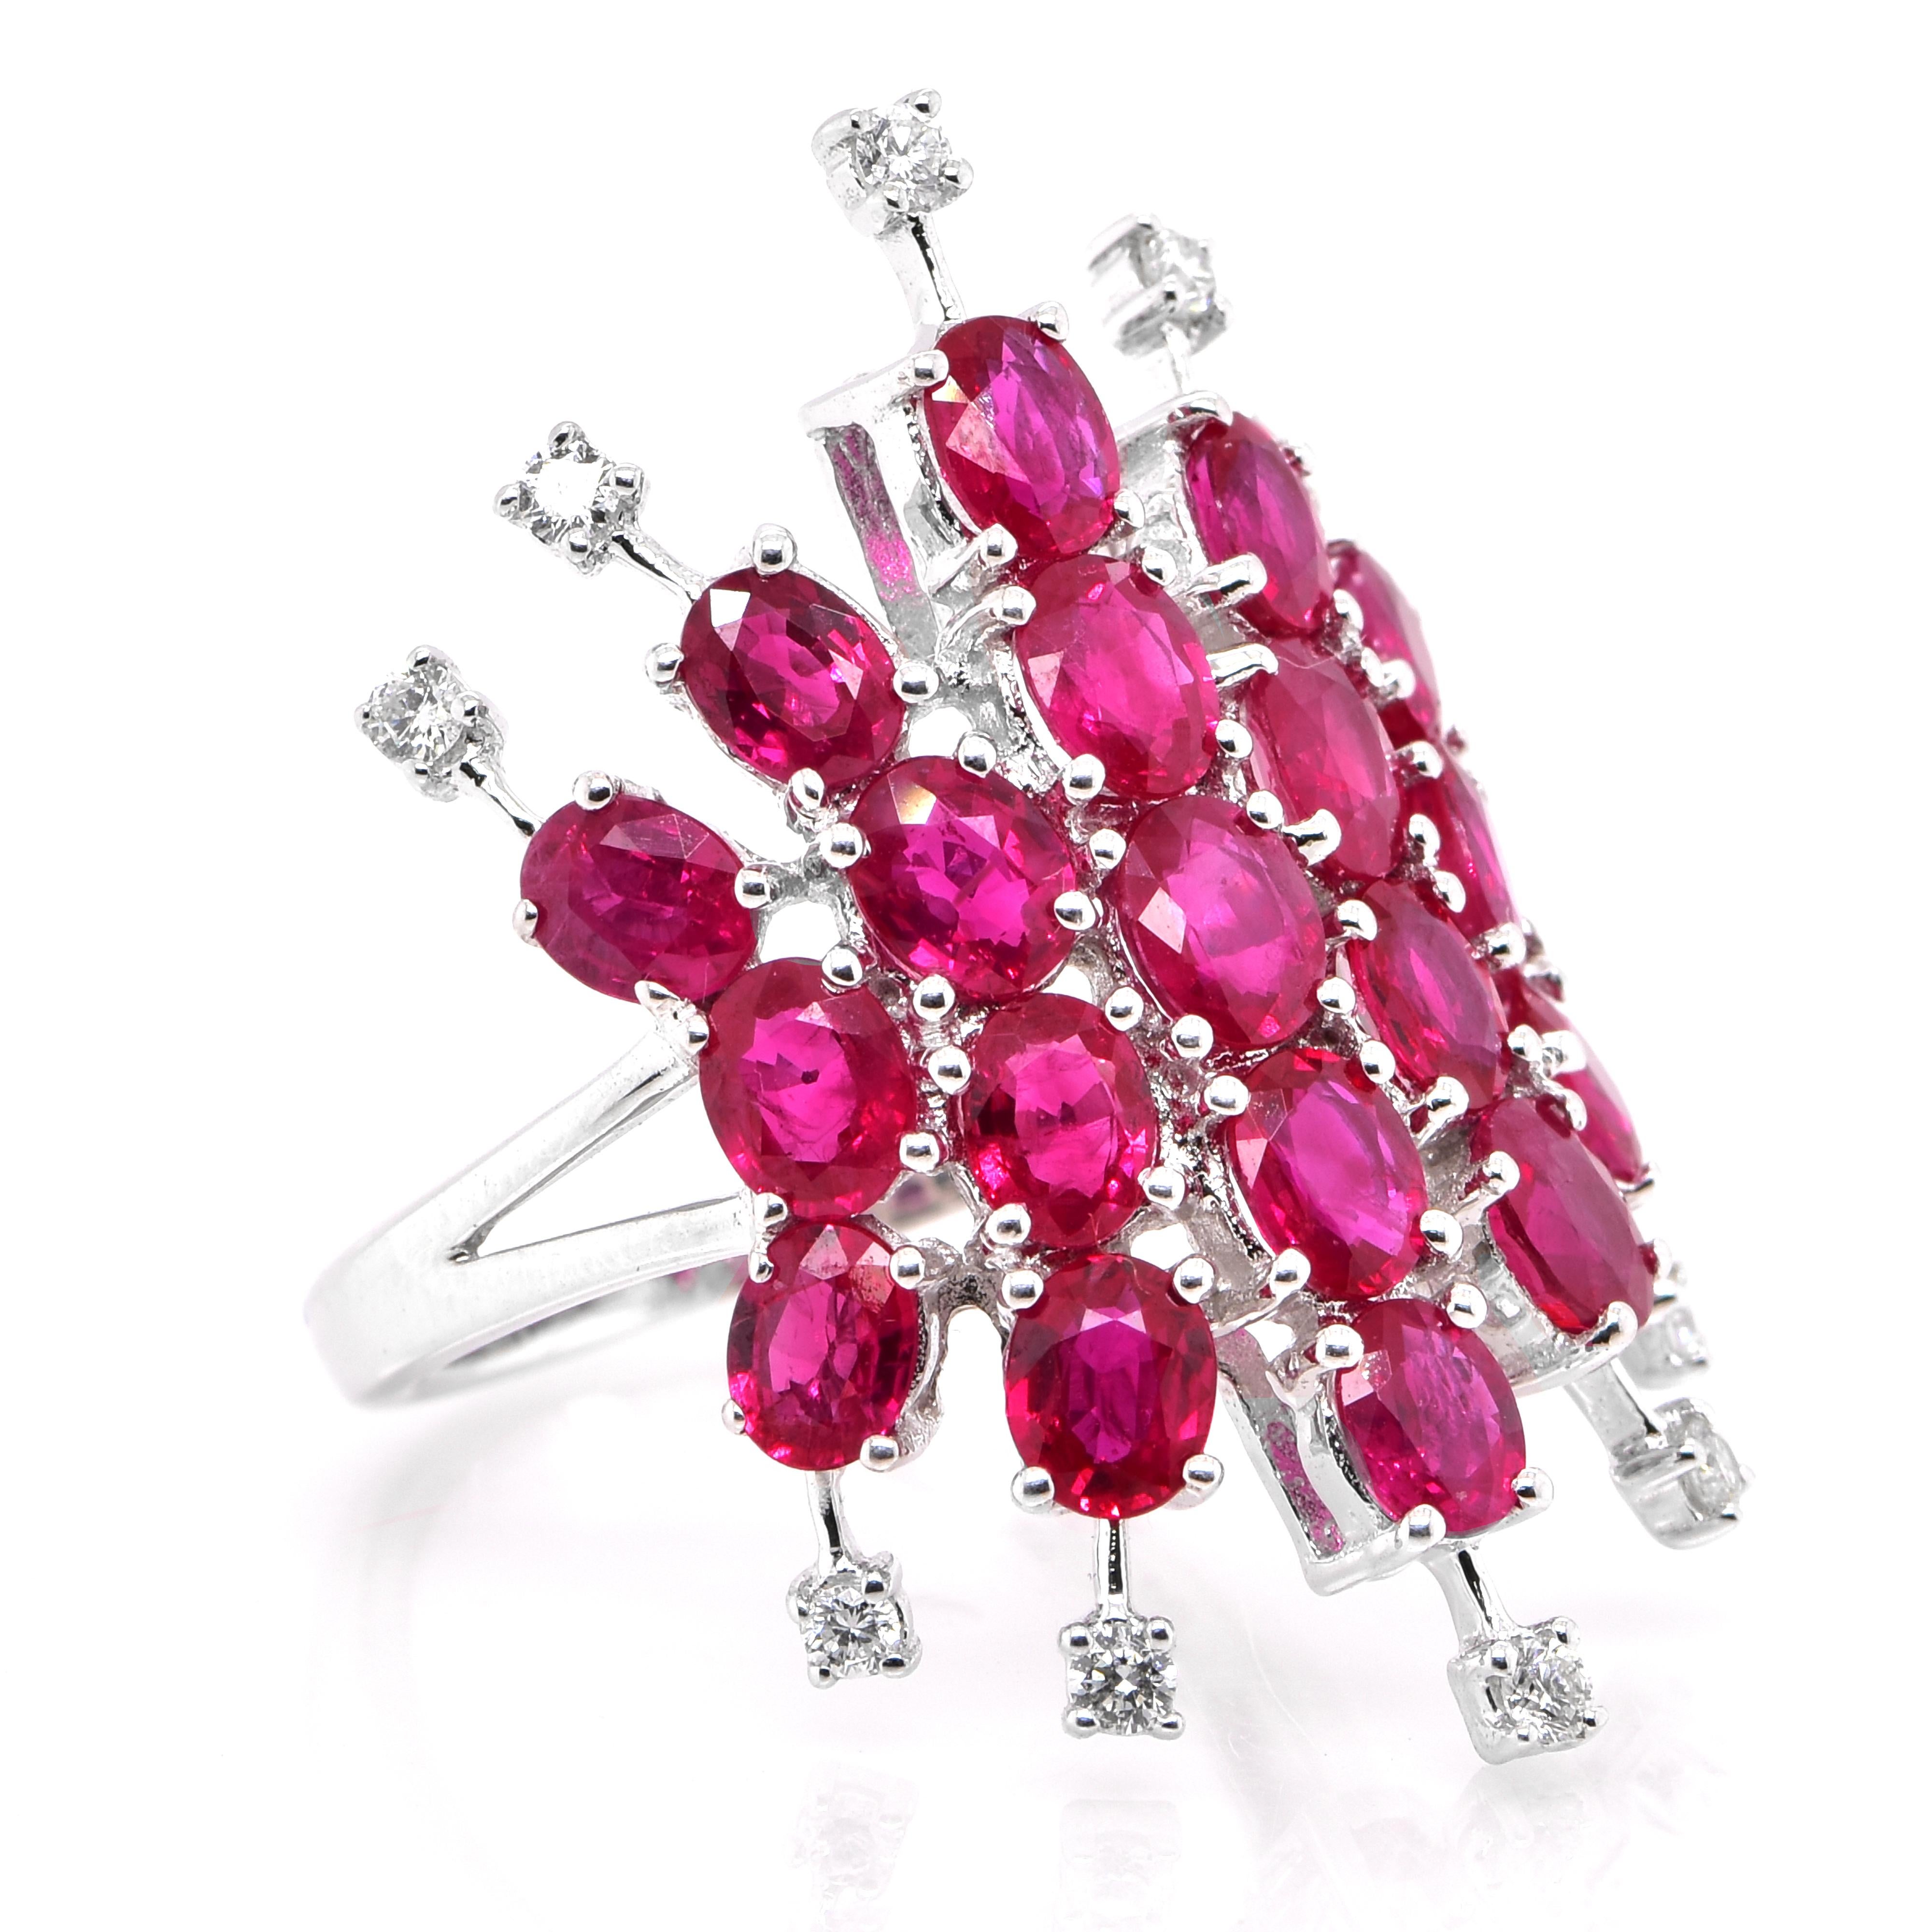 Modern 5.10 Carat Natural Rubies and Diamond Cocktail Ring Made in 18K White Gold For Sale